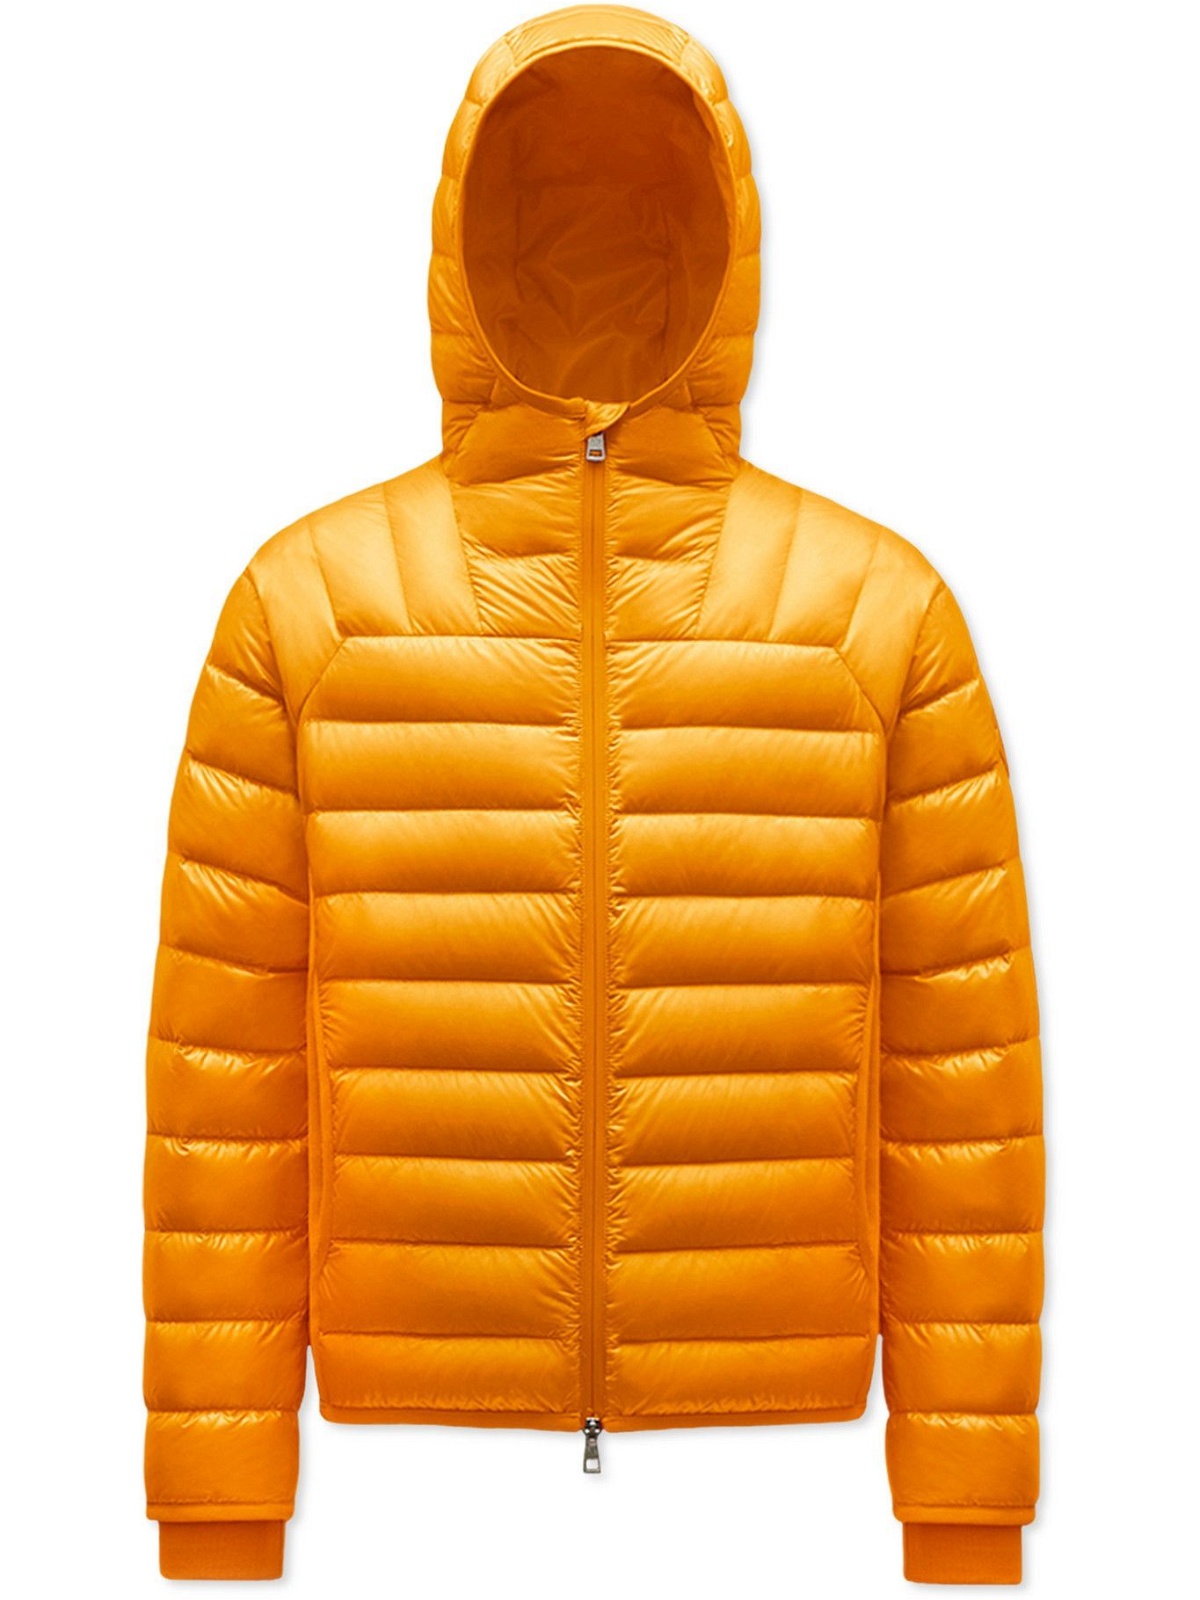 Moncler Genius - 2 Moncler 1952 Taito Quilted Nylon Hooded Down Jacket - Yellow